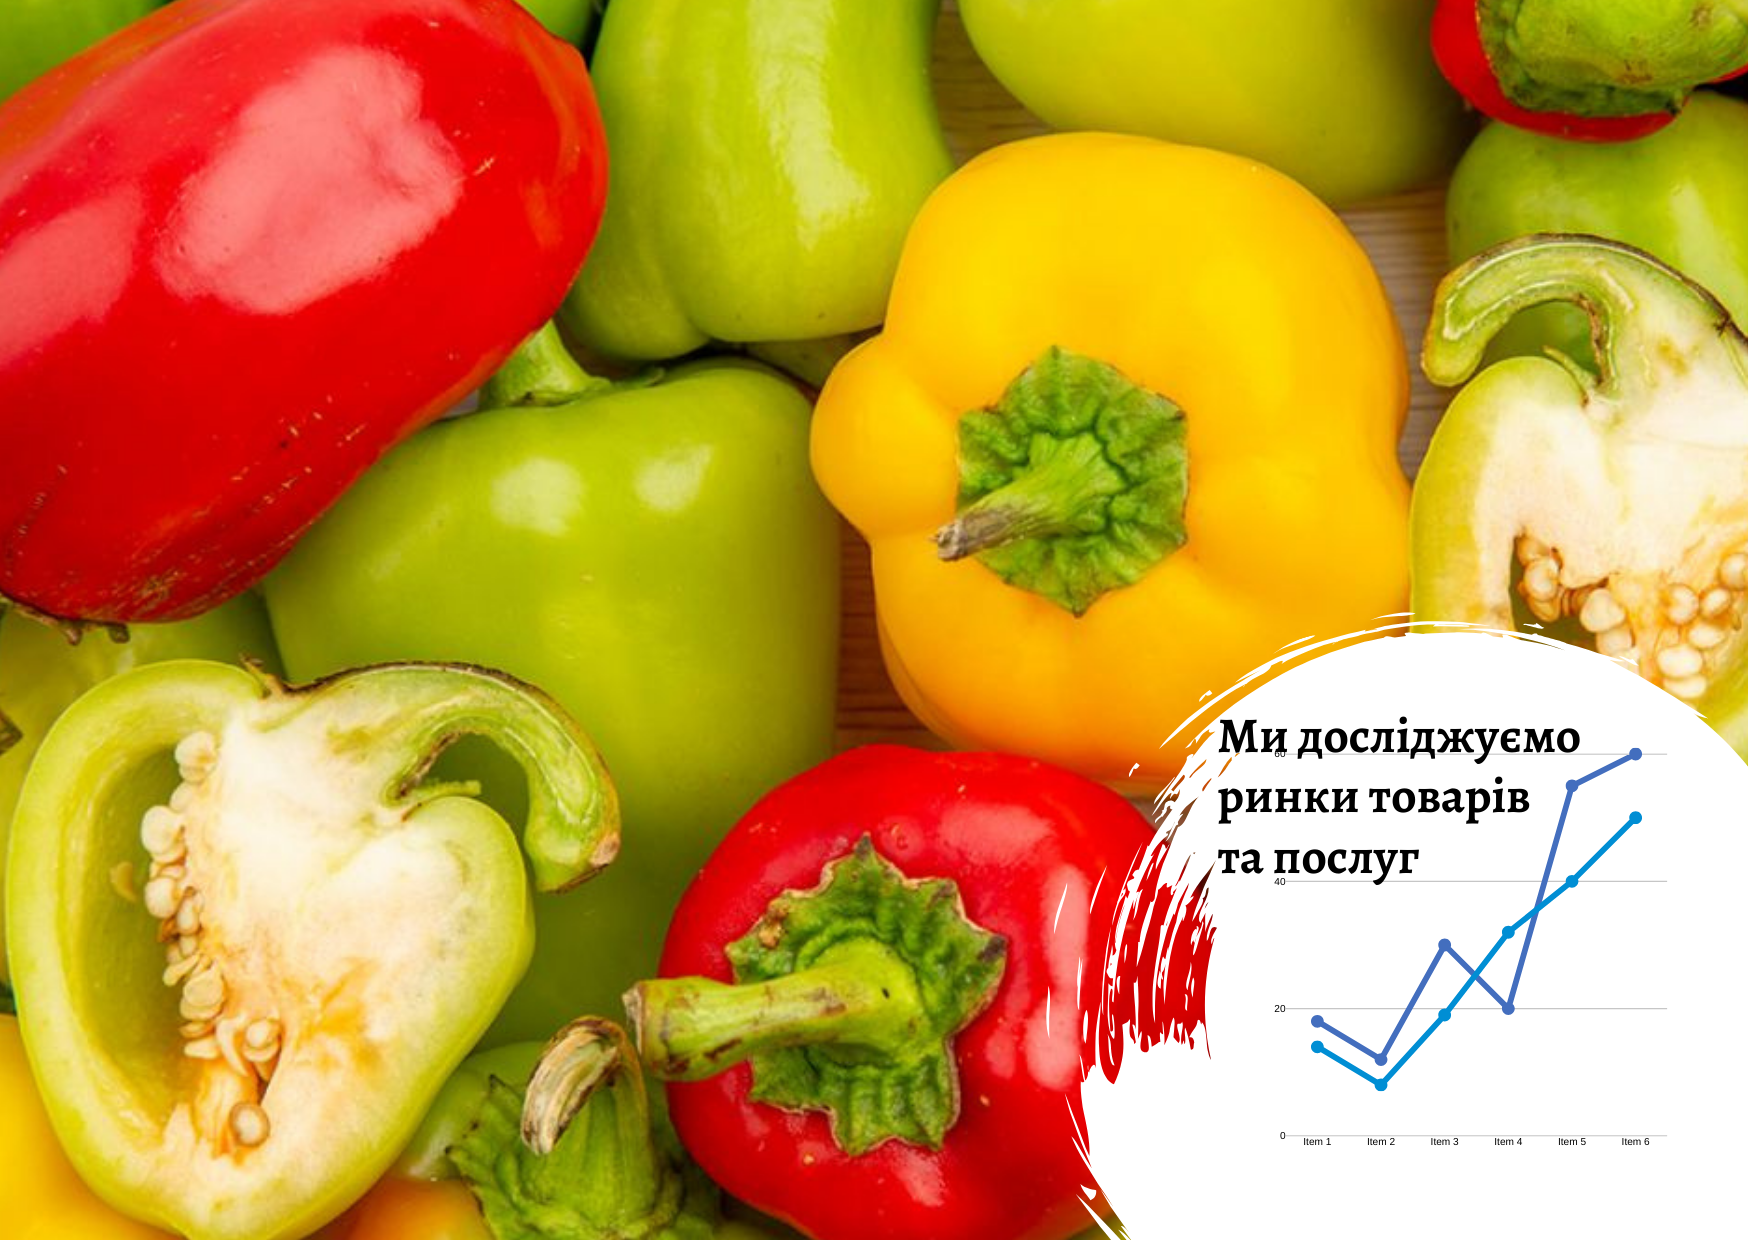 Ukrainian pepper market: damage from war and possibilities for recovery